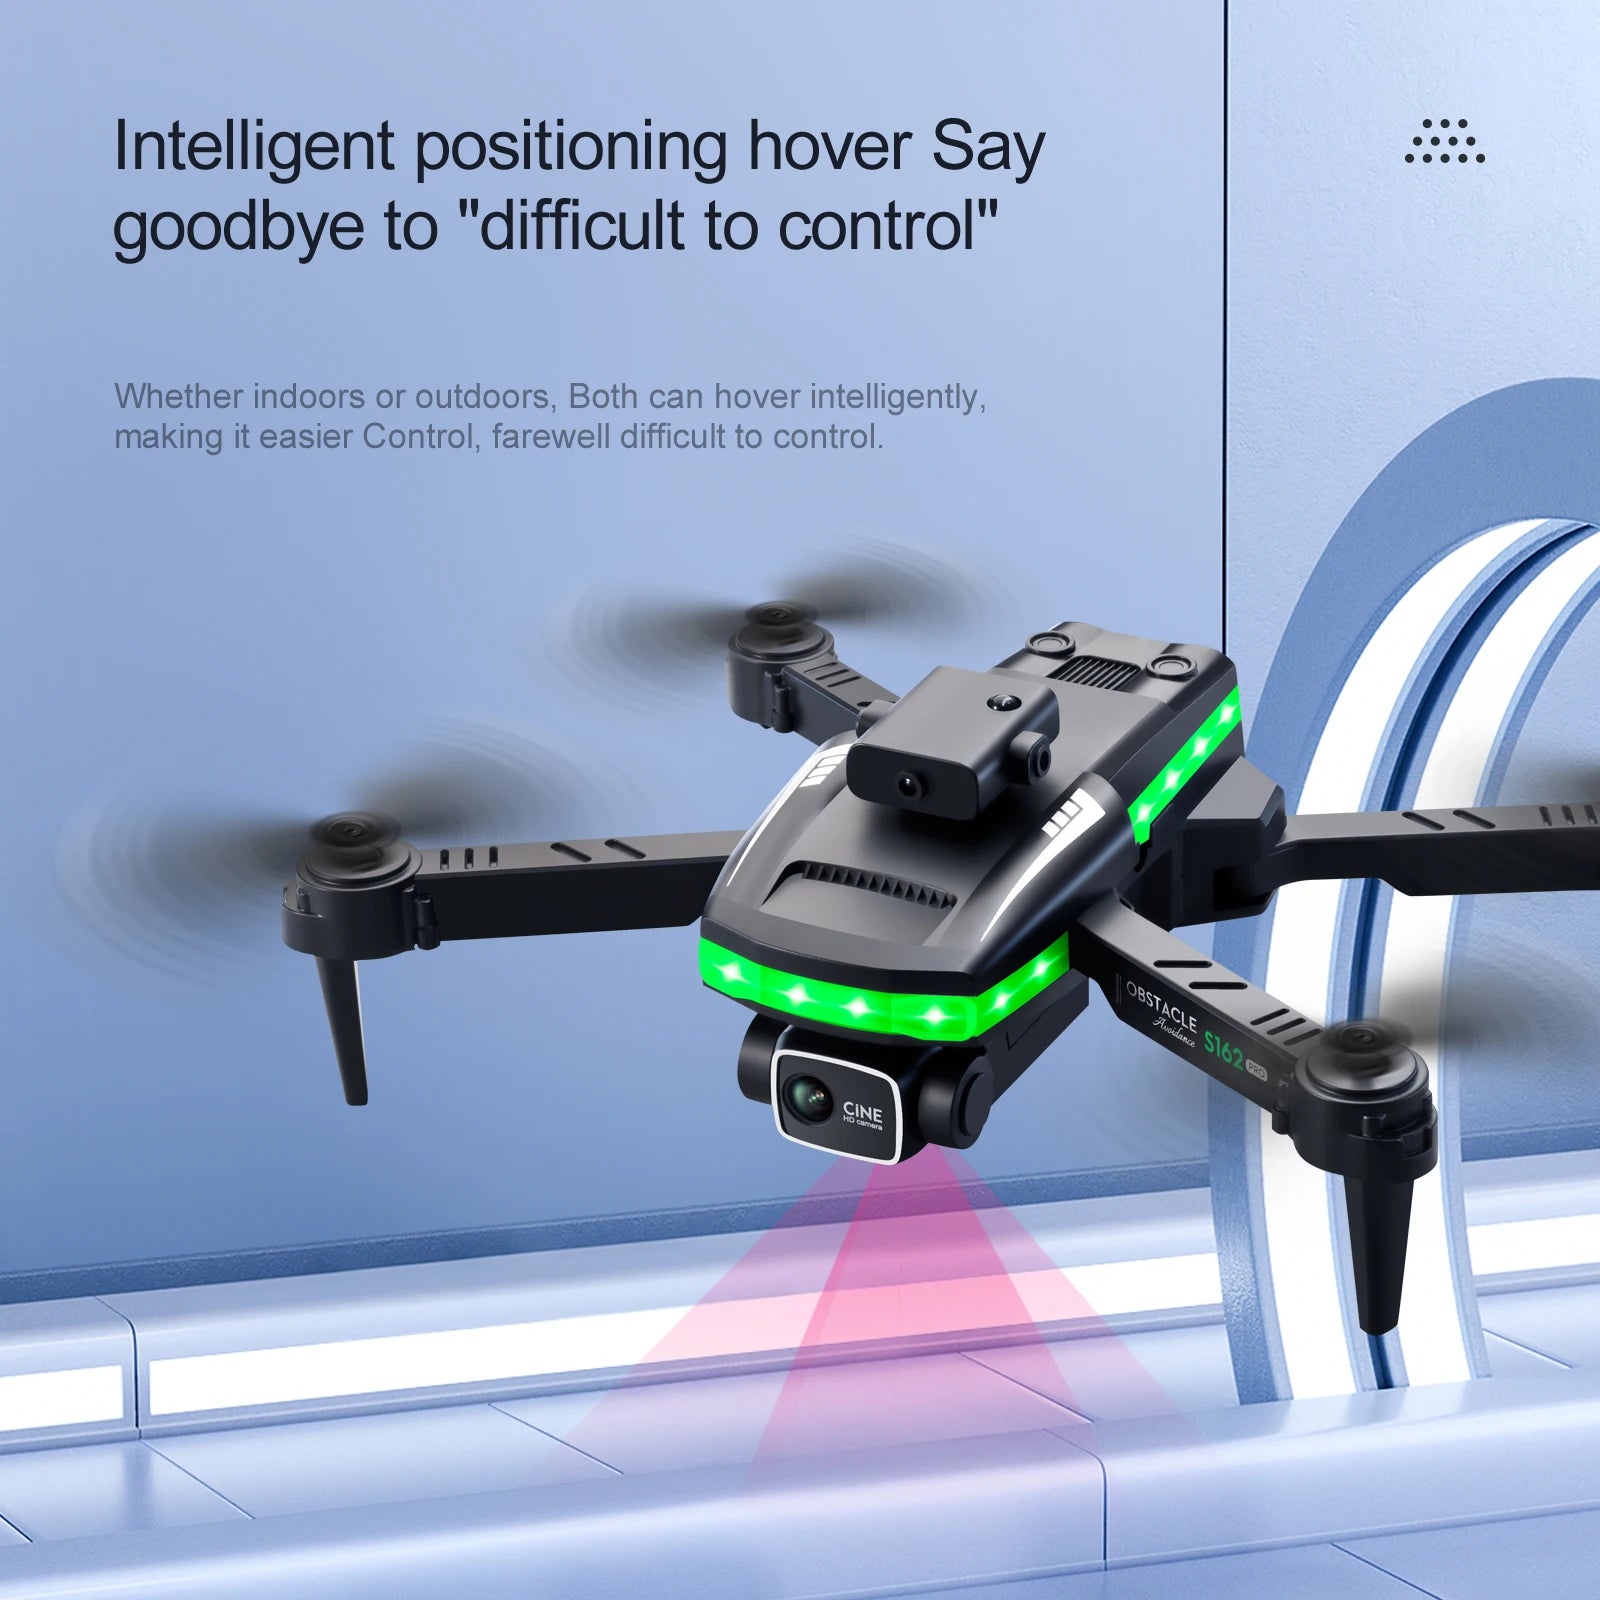 S162 Pro Drone, intelligent positioning hover make it easier to control, farewell difficult to